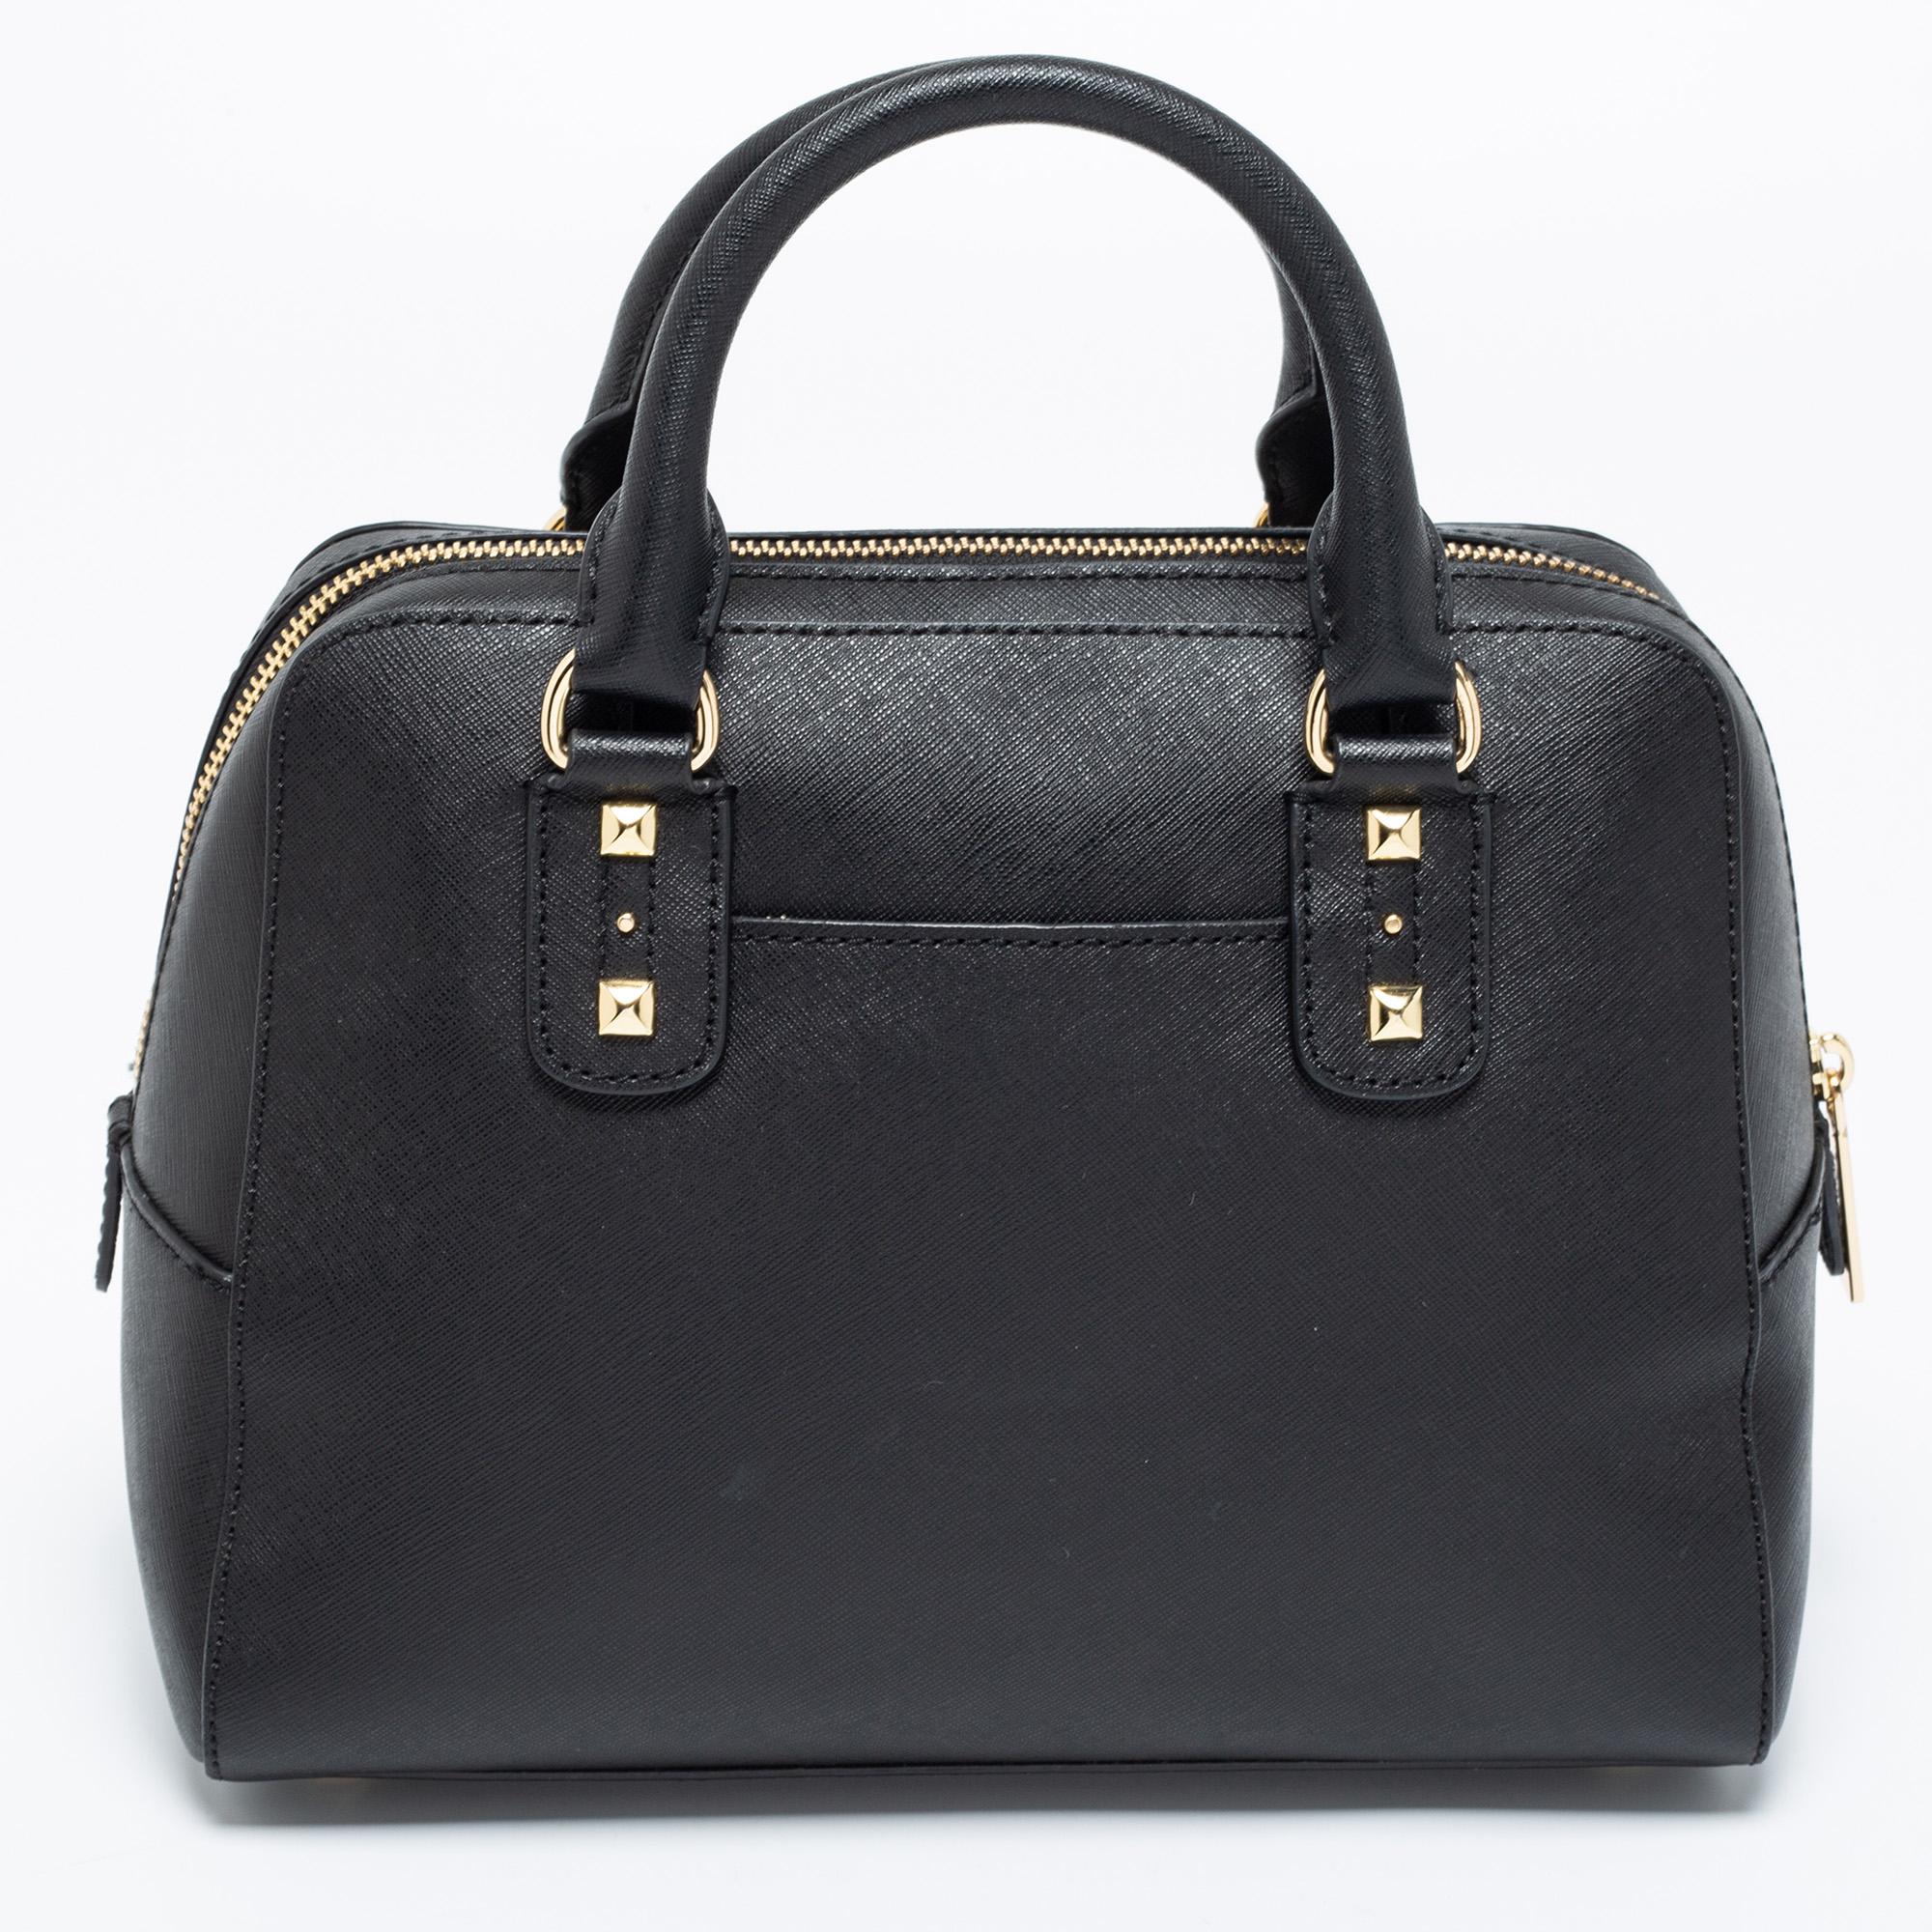 Easy to carry and stylish in appearance, this Sandrine satchel from MICHAEL Michael Kors will certainly be your favorite pick this season. It is crafted using black Saffiano leather, with gold-tone hardware elevating its beauty. It provides two